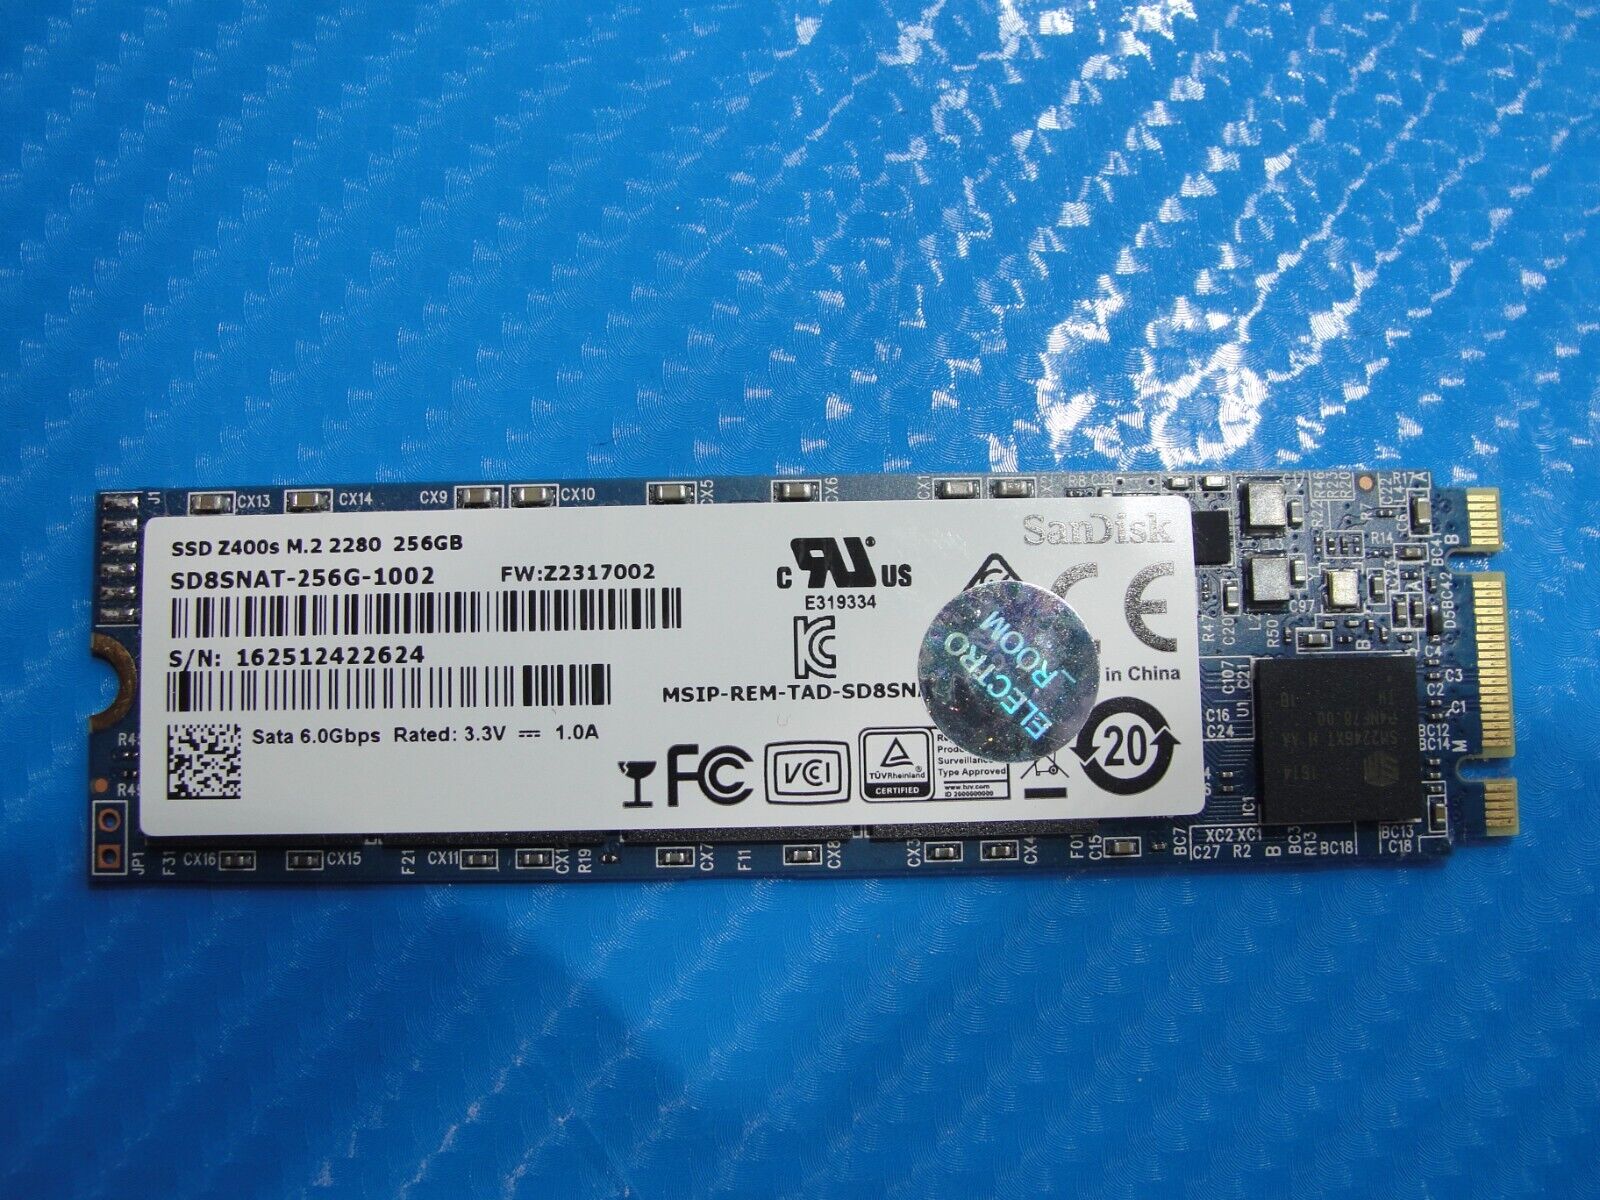 Asus UX310U SanDisk Z400s M.2 SATA 256Gb SSD Solid State Drive sd8snat-256g-1002 